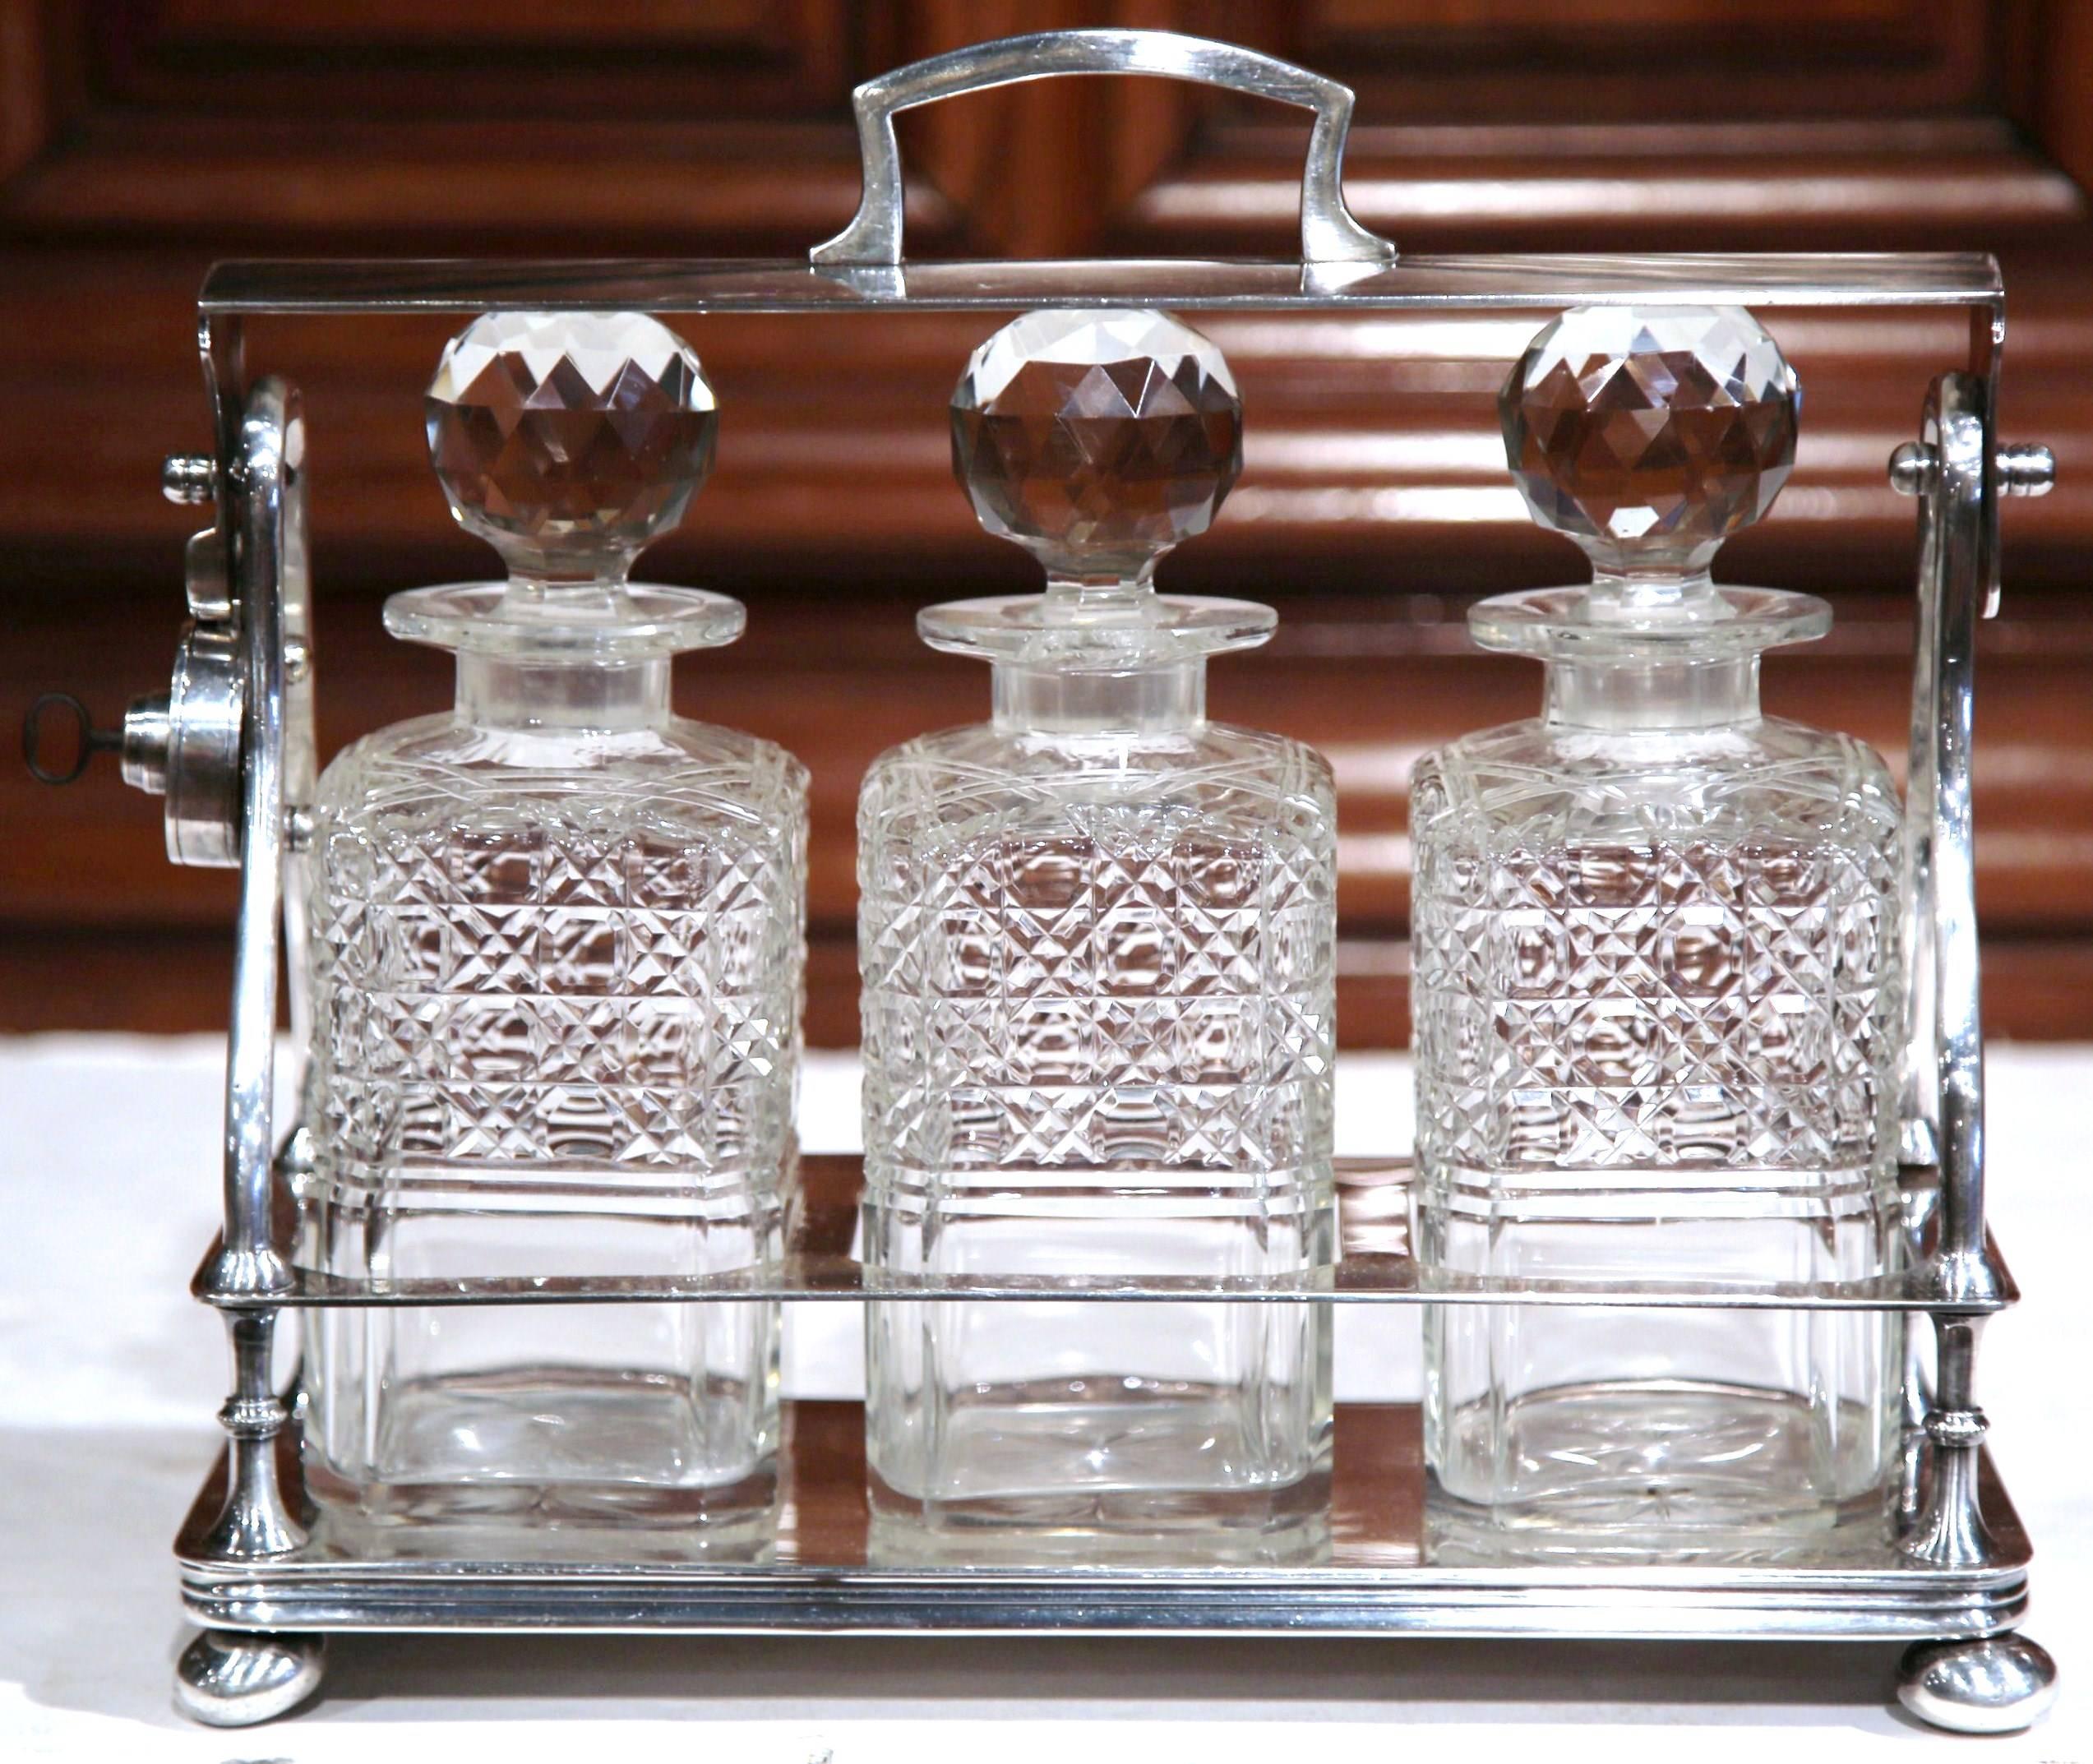 Entertain in style with this beautifully crafted, antique Tantalus from England. Crafted, circa 1860, the bar accessory features three cut-glass carafes with decorative round stoppers. The top handle can be locked for protective purposes and to keep